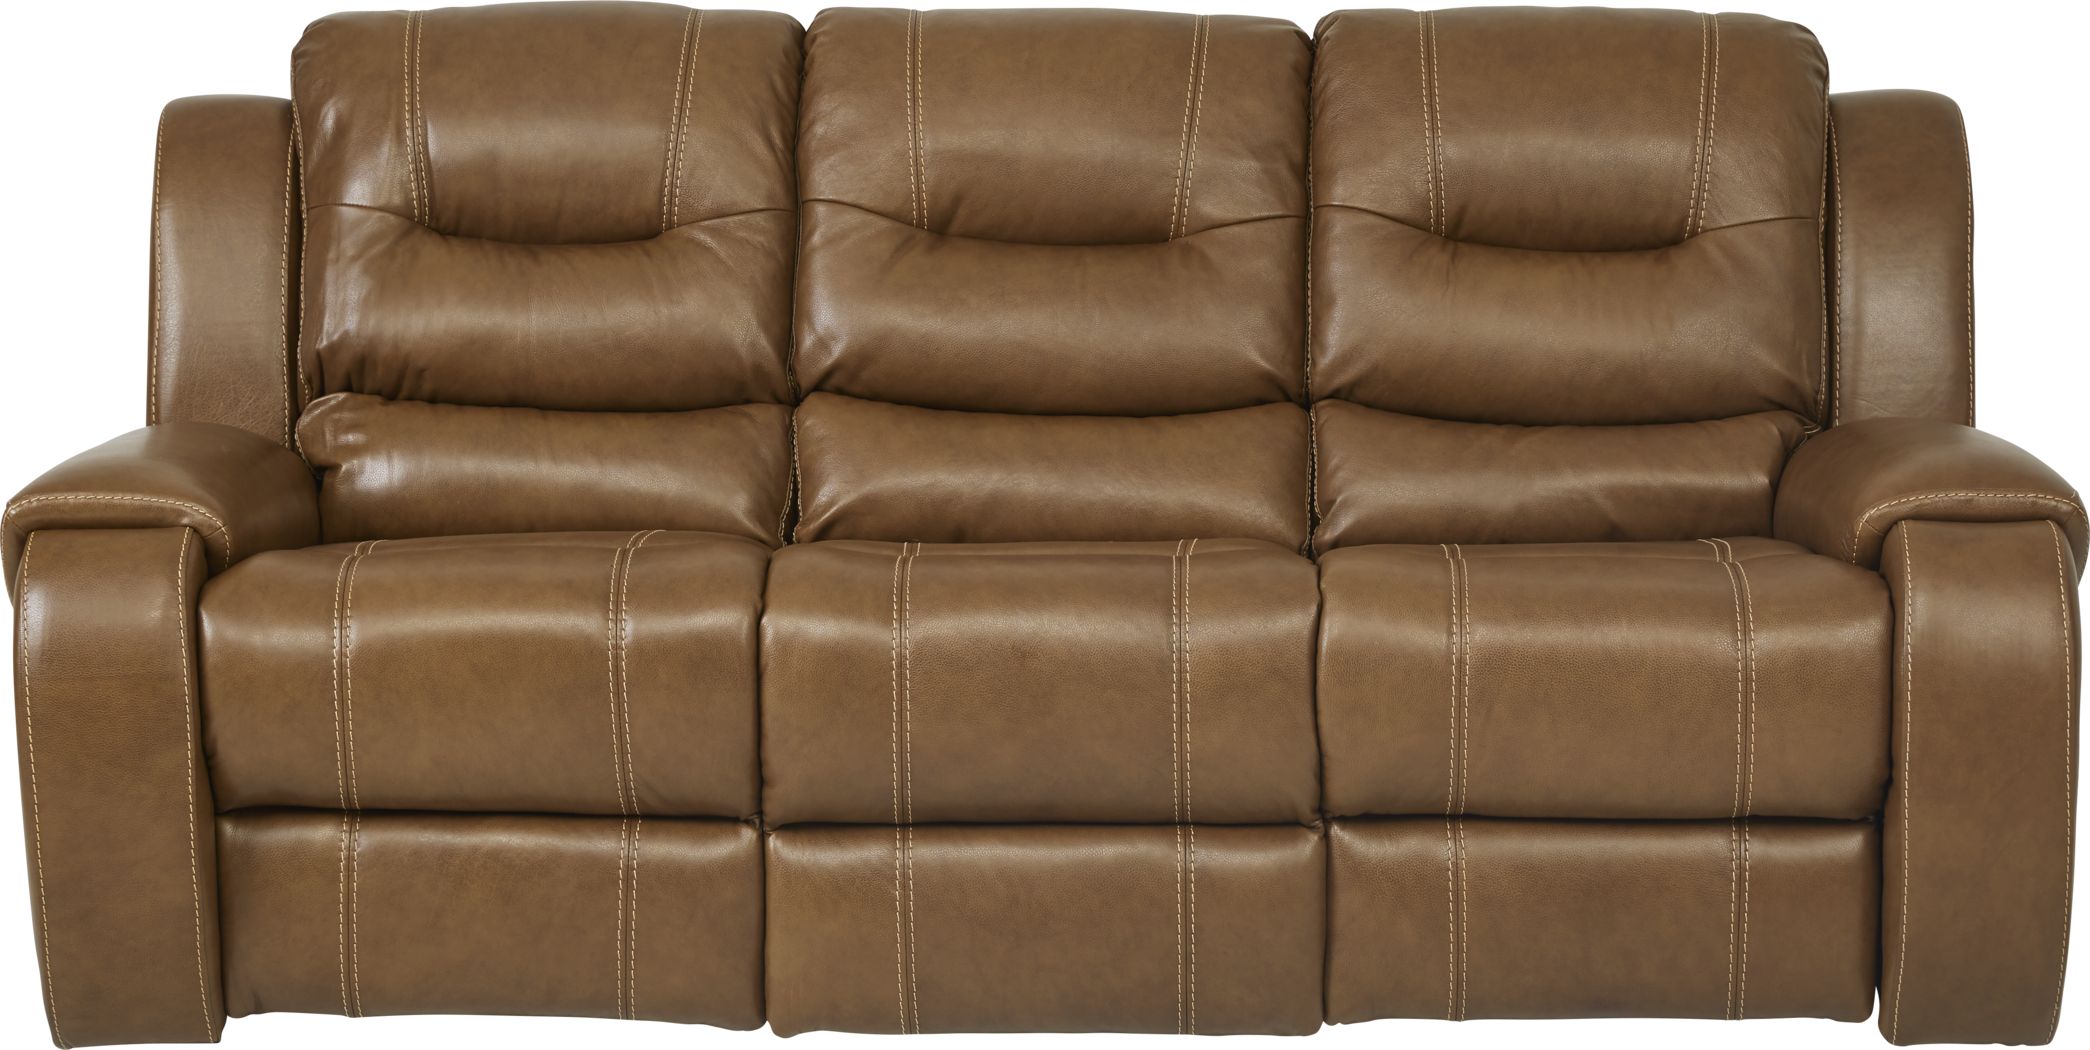 rooms to go leather reclining sofa